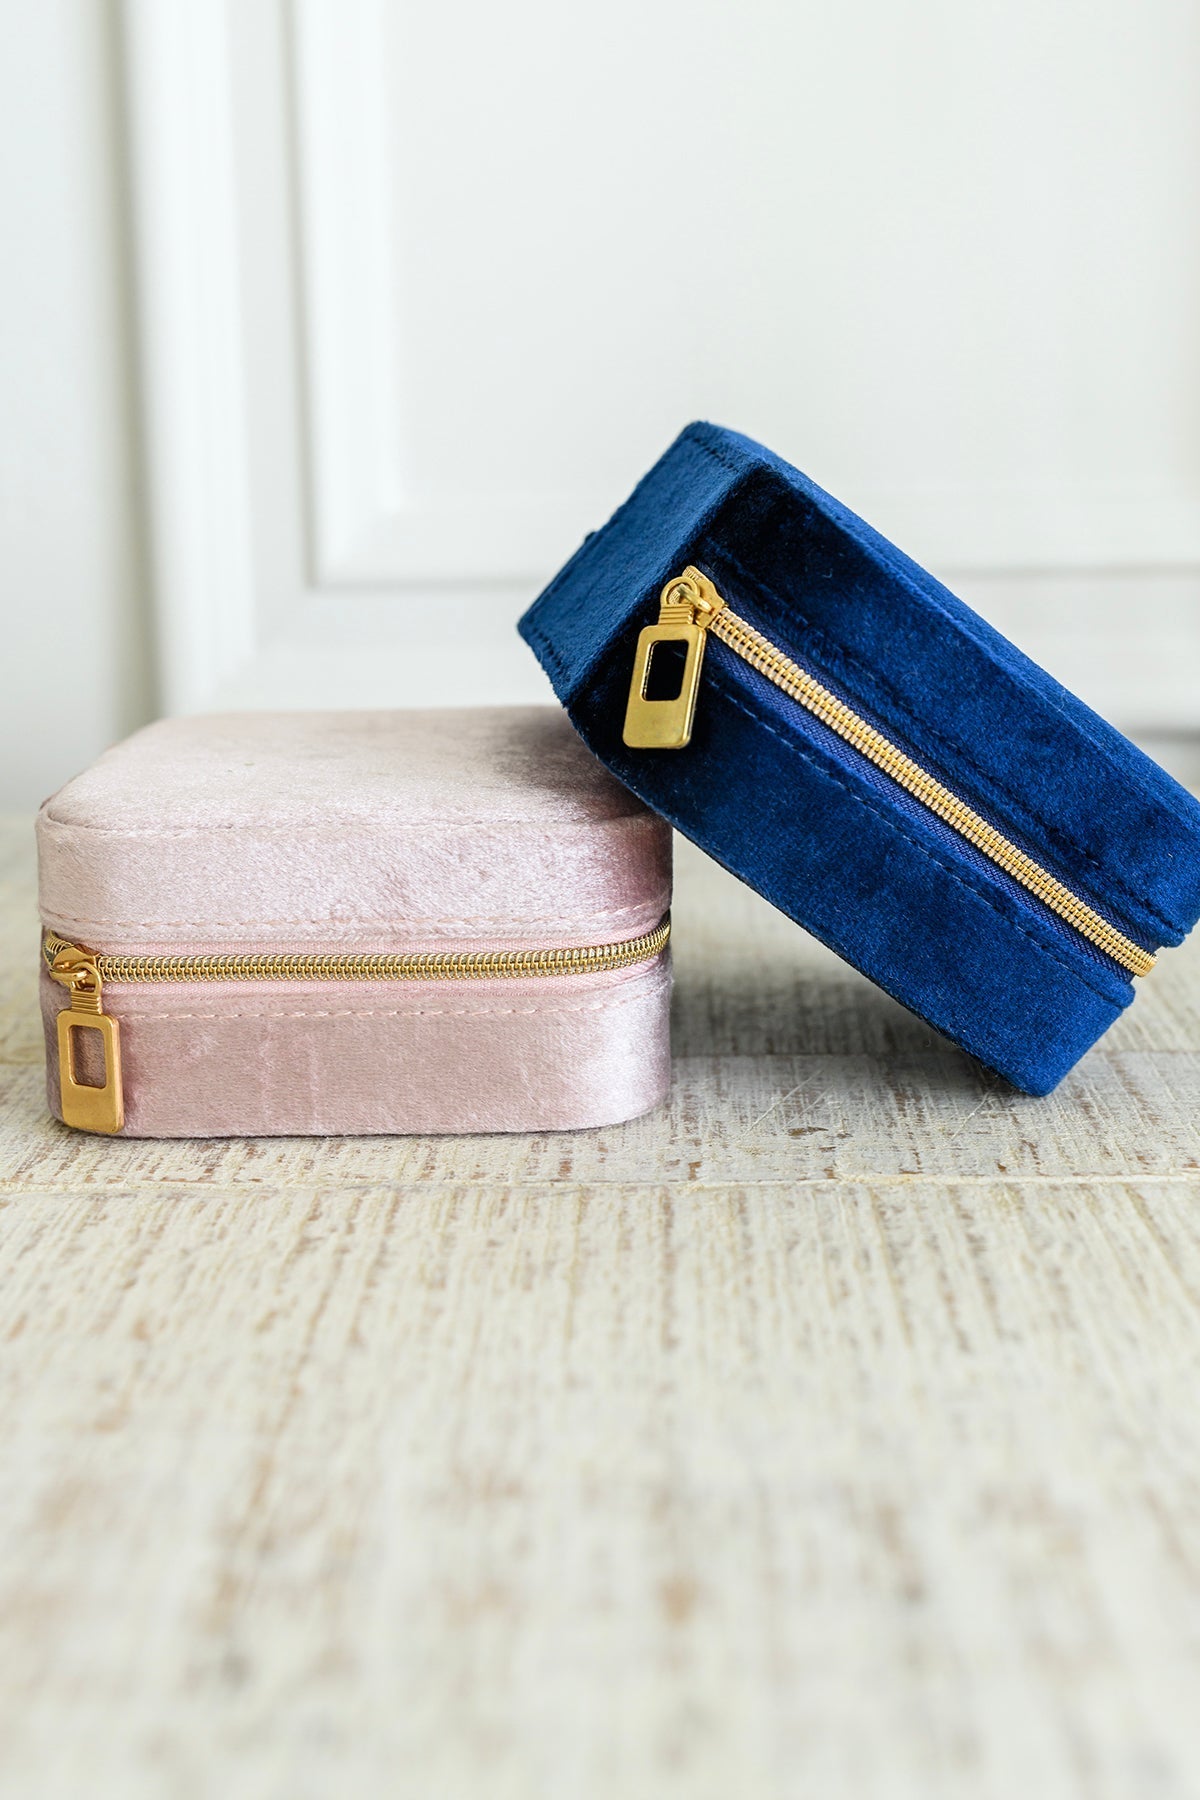 Kept and Carried Velvet Jewelry Box in Navy